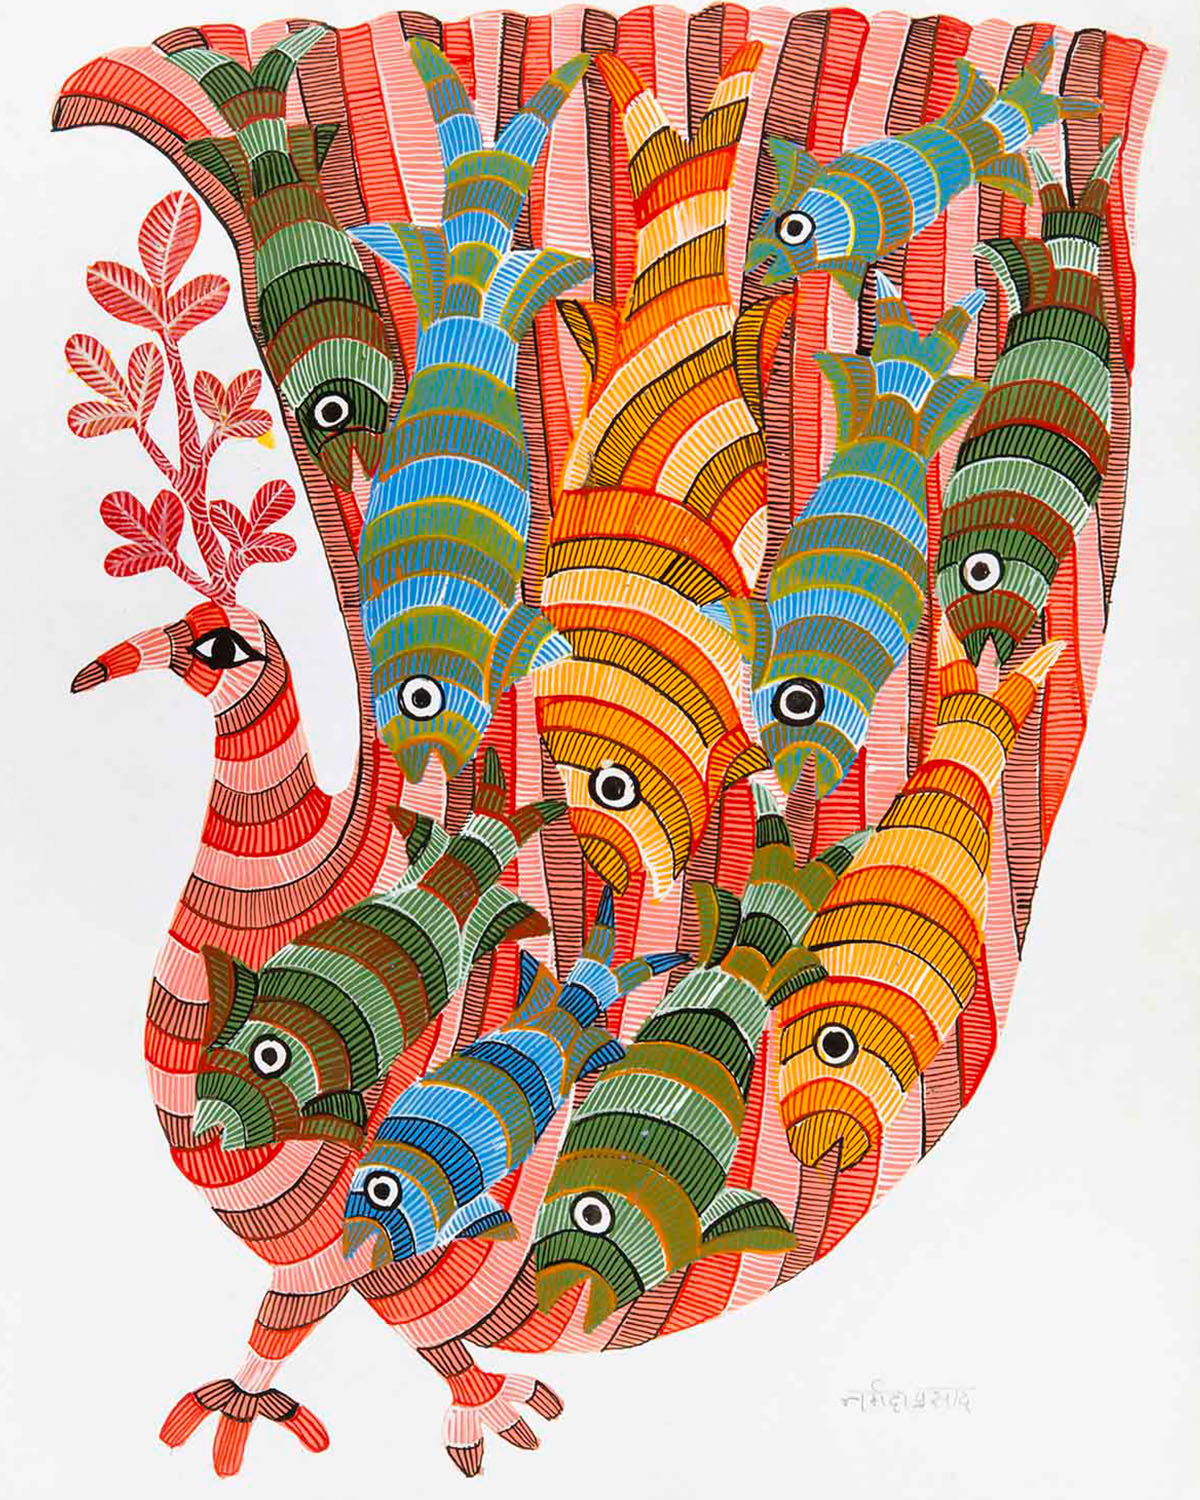 A Gond painting of a peacock with an upright train on which several fish are depicted.